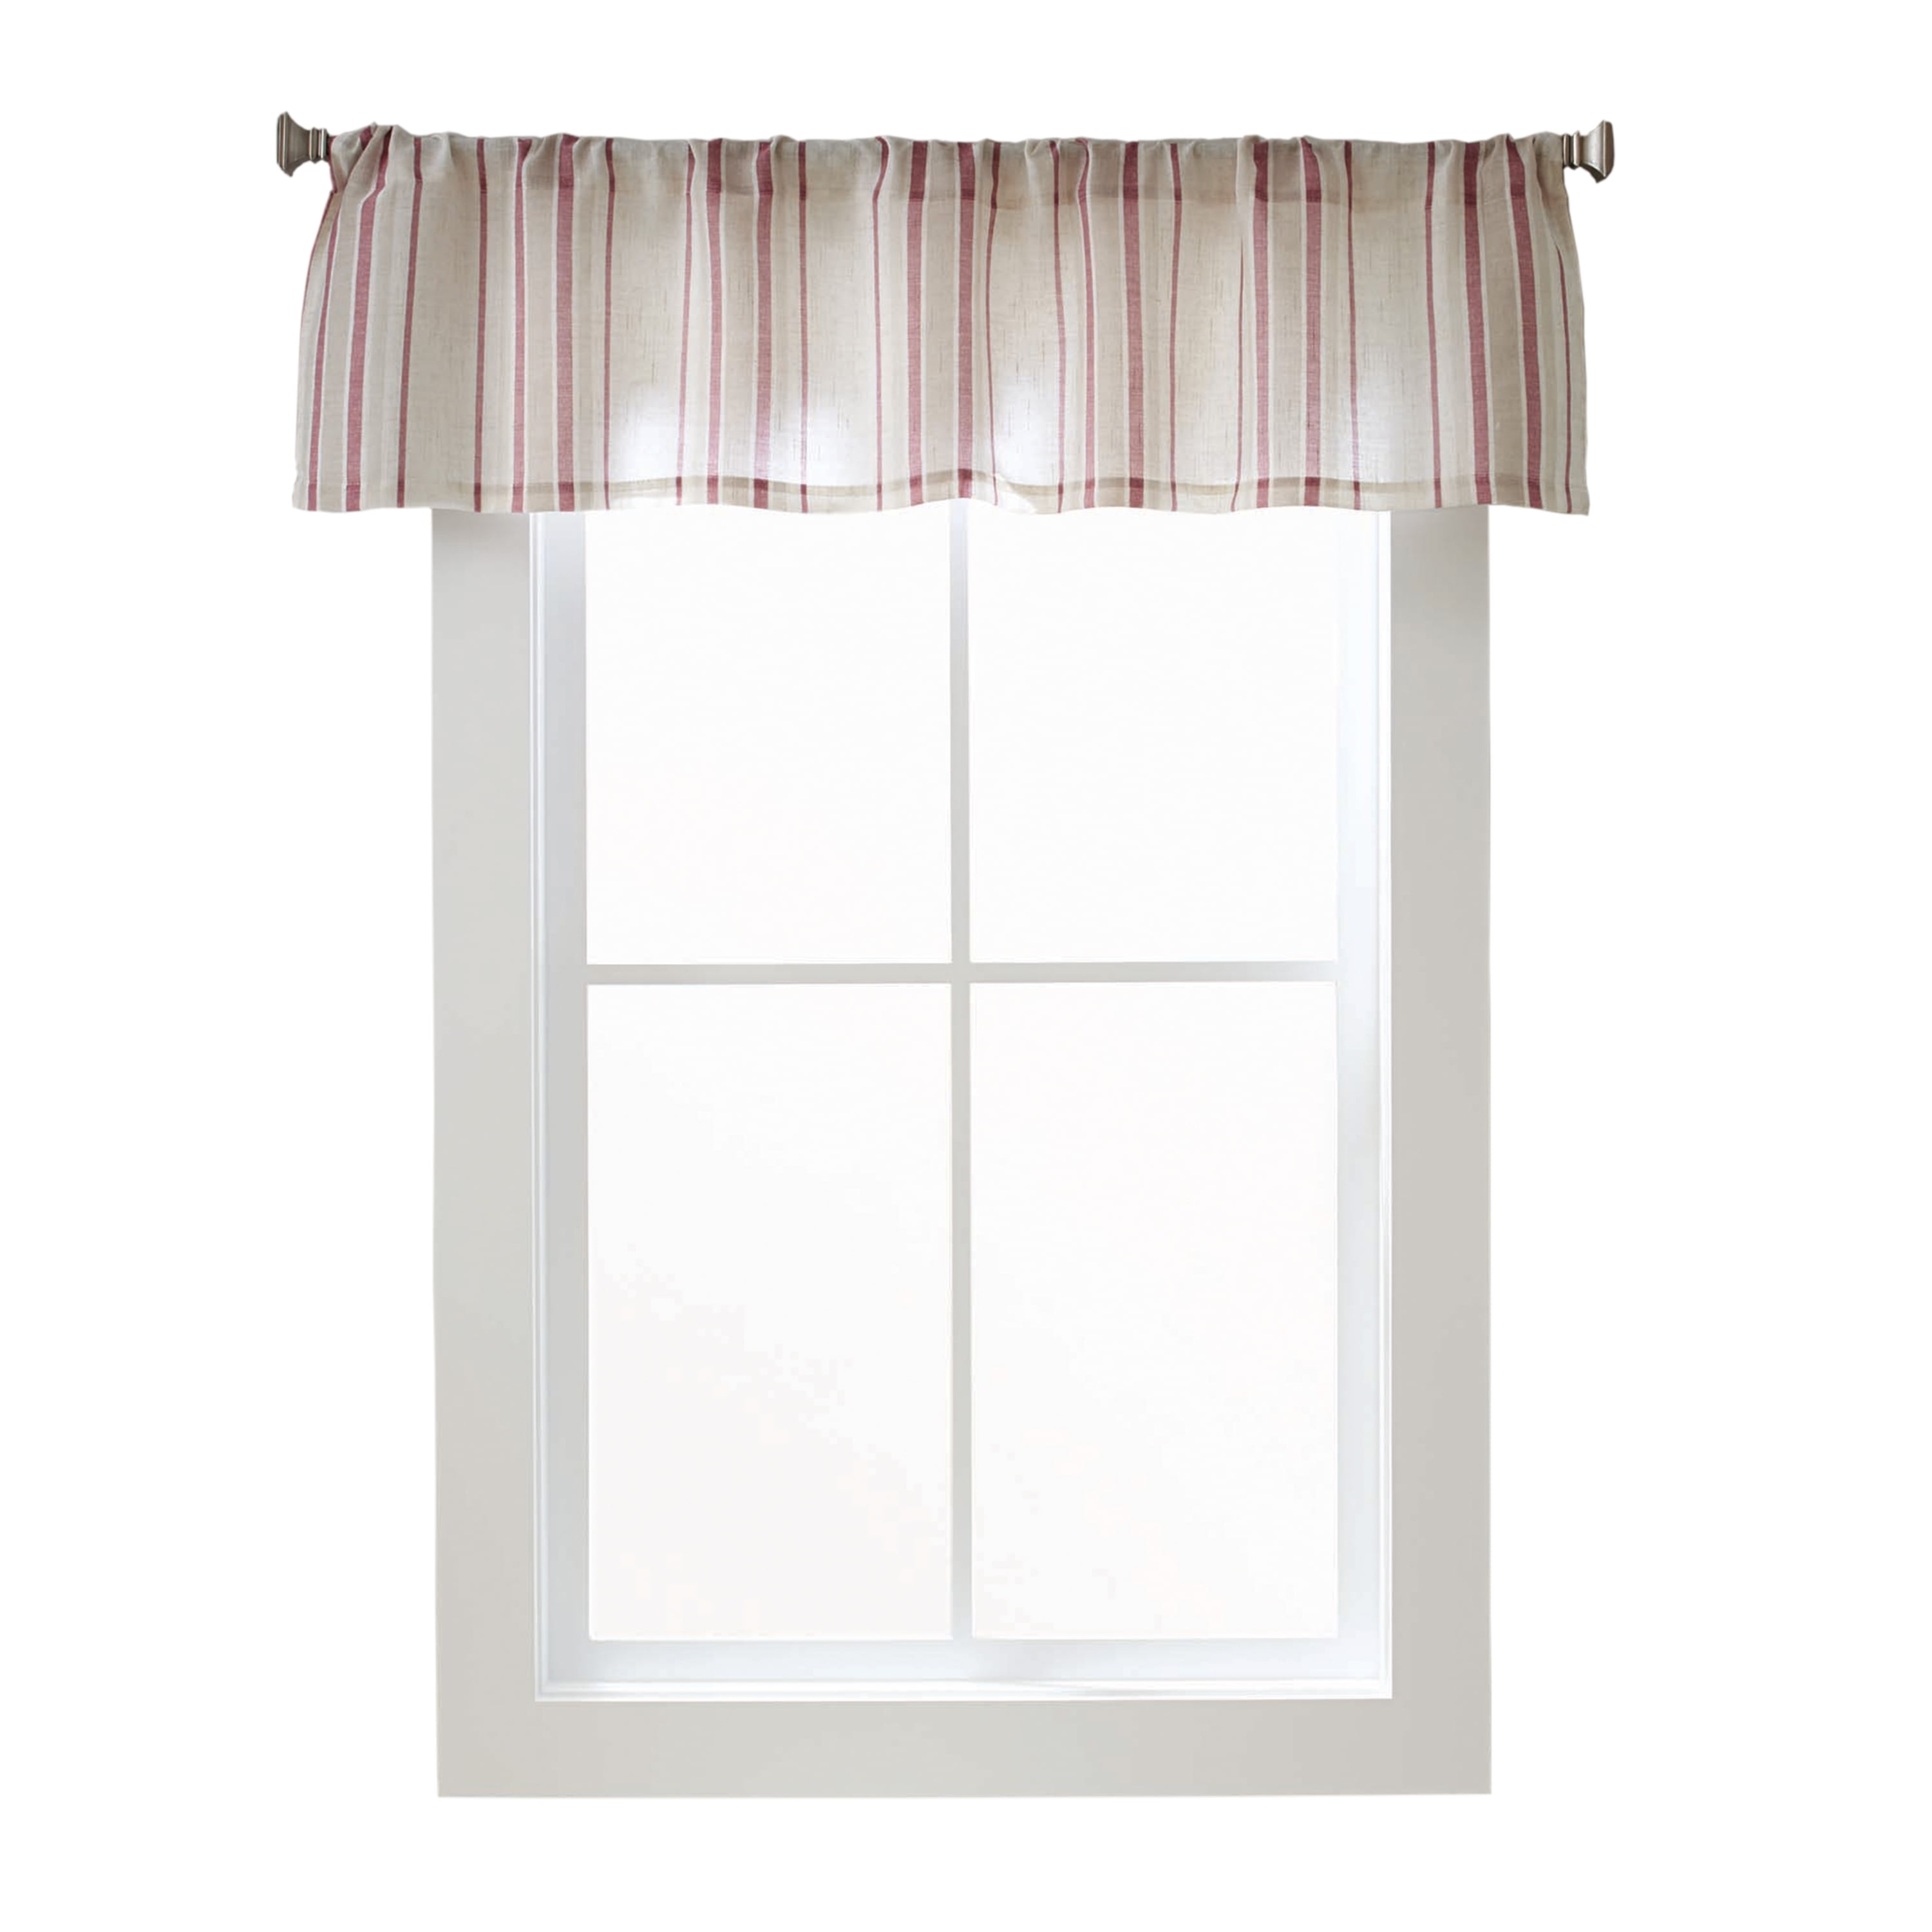 42 X 15 INCHES Handmade  Red and White Stripe Valance 